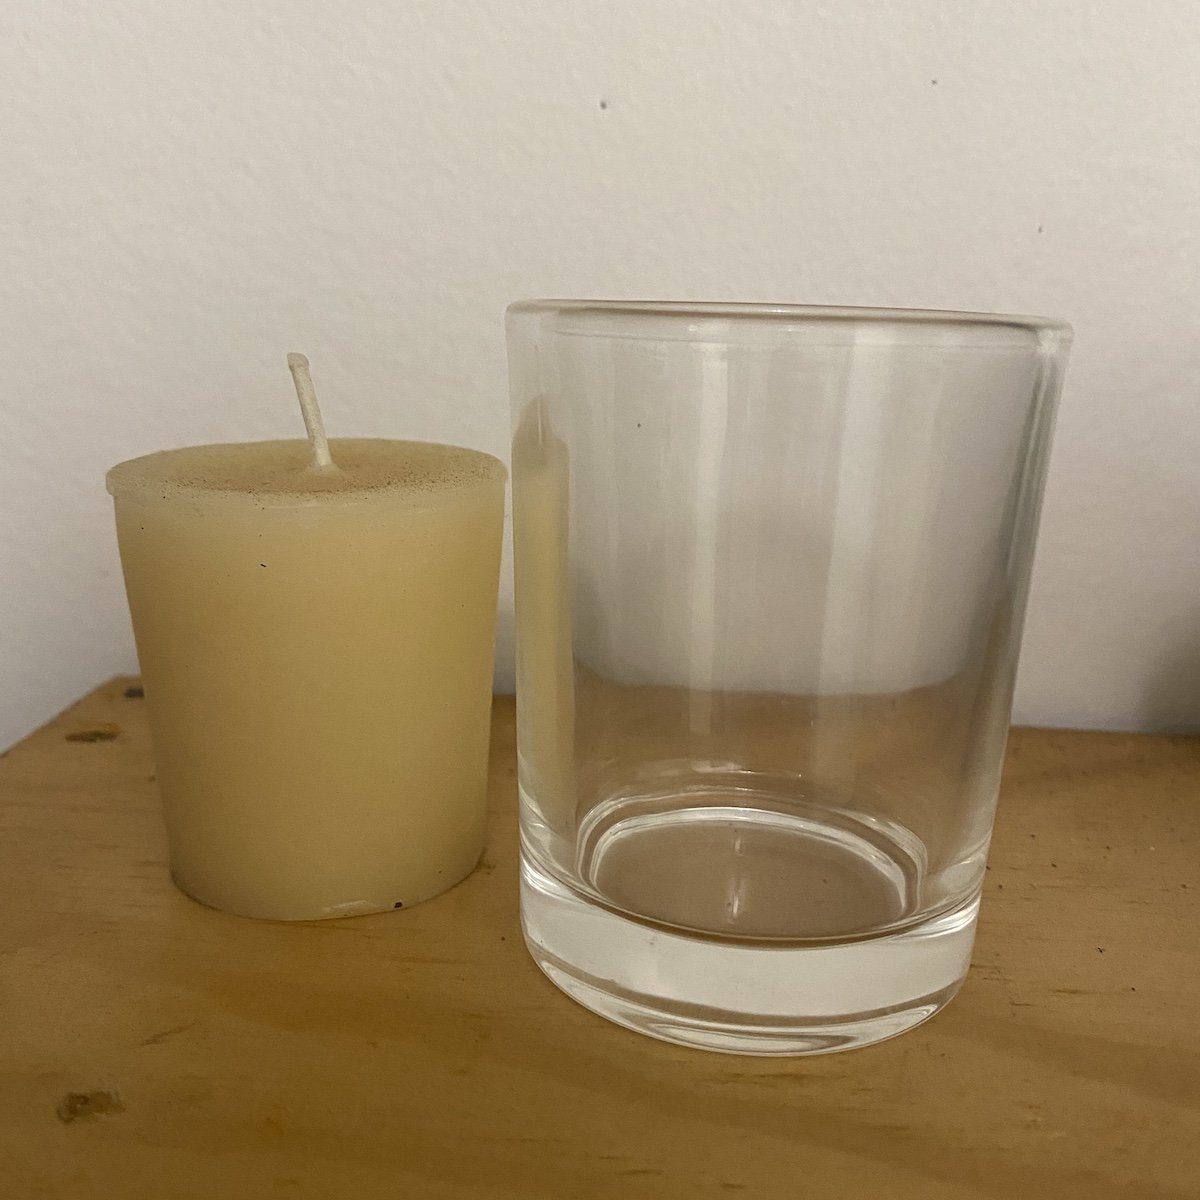 Glass Votive holder Beeswax Votives Happy Flame Glass Votive holder (candle not included) $3.00 